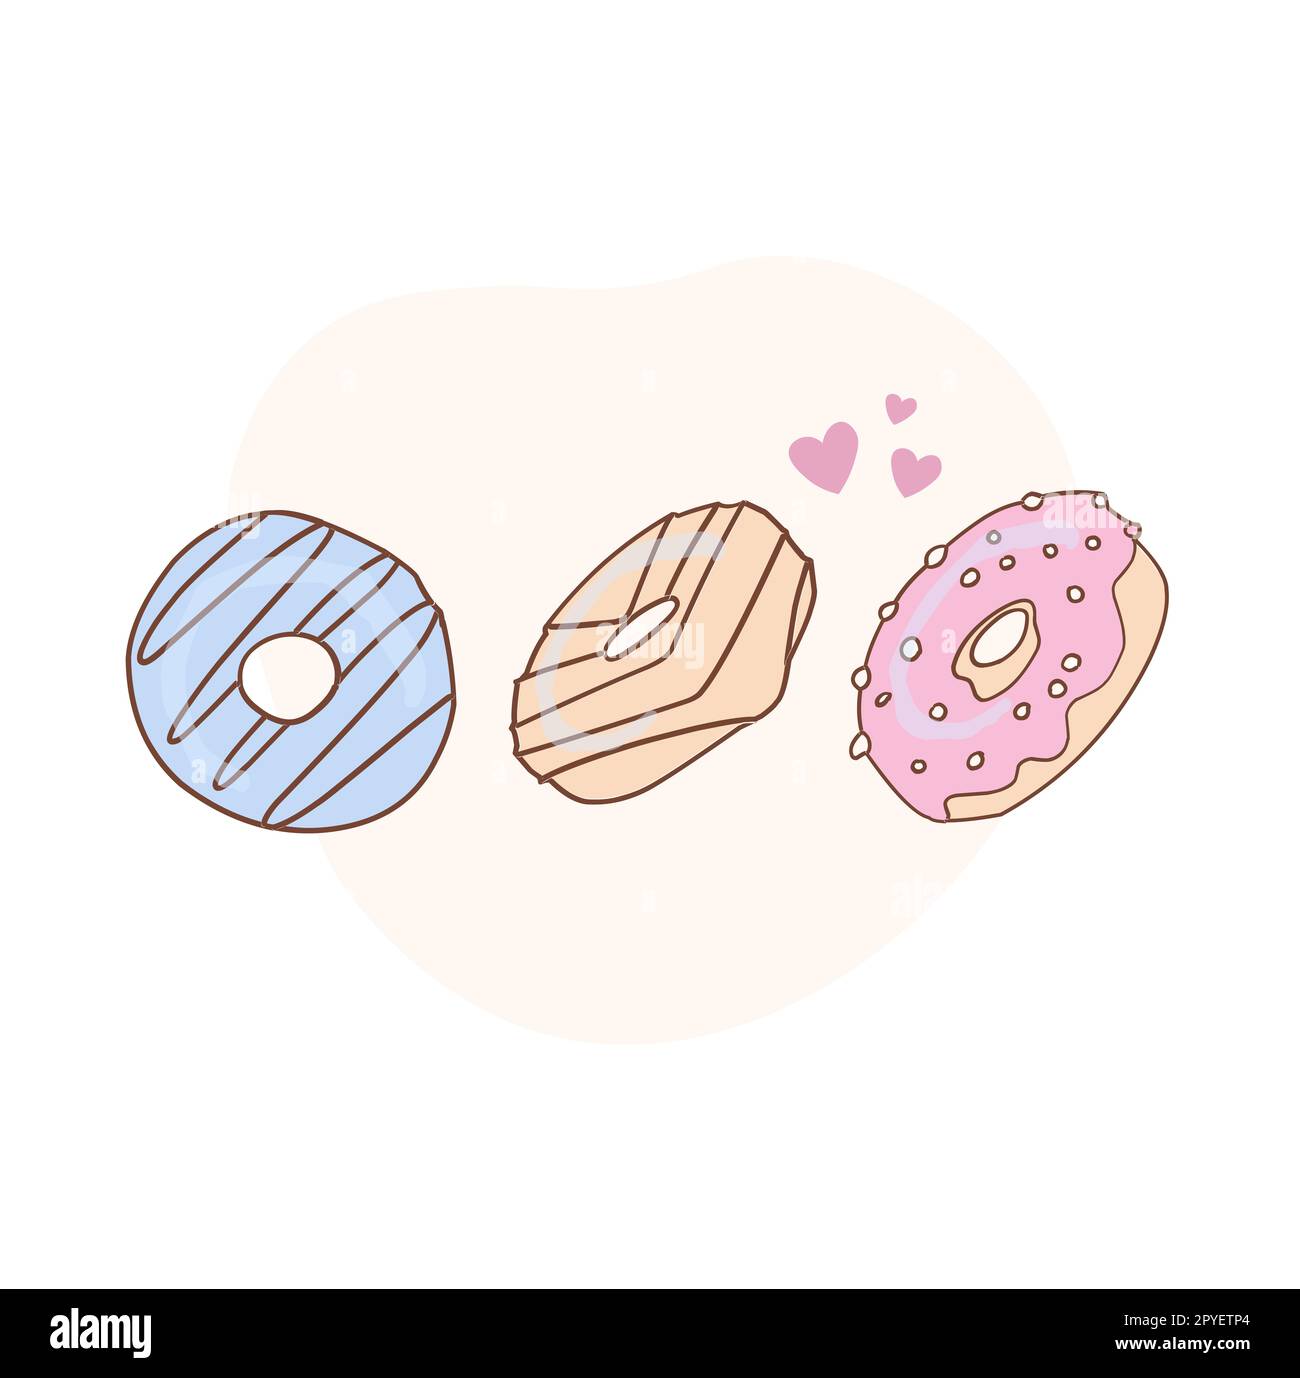 https://c8.alamy.com/comp/2PYETP4/national-donut-dayglazed-sweet-donut-draw-funny-american-kawaii-traditional-sweet-donut-vector-illustration-american-traditional-food-cooking-menu-concept-doodle-in-cartoon-style-2PYETP4.jpg